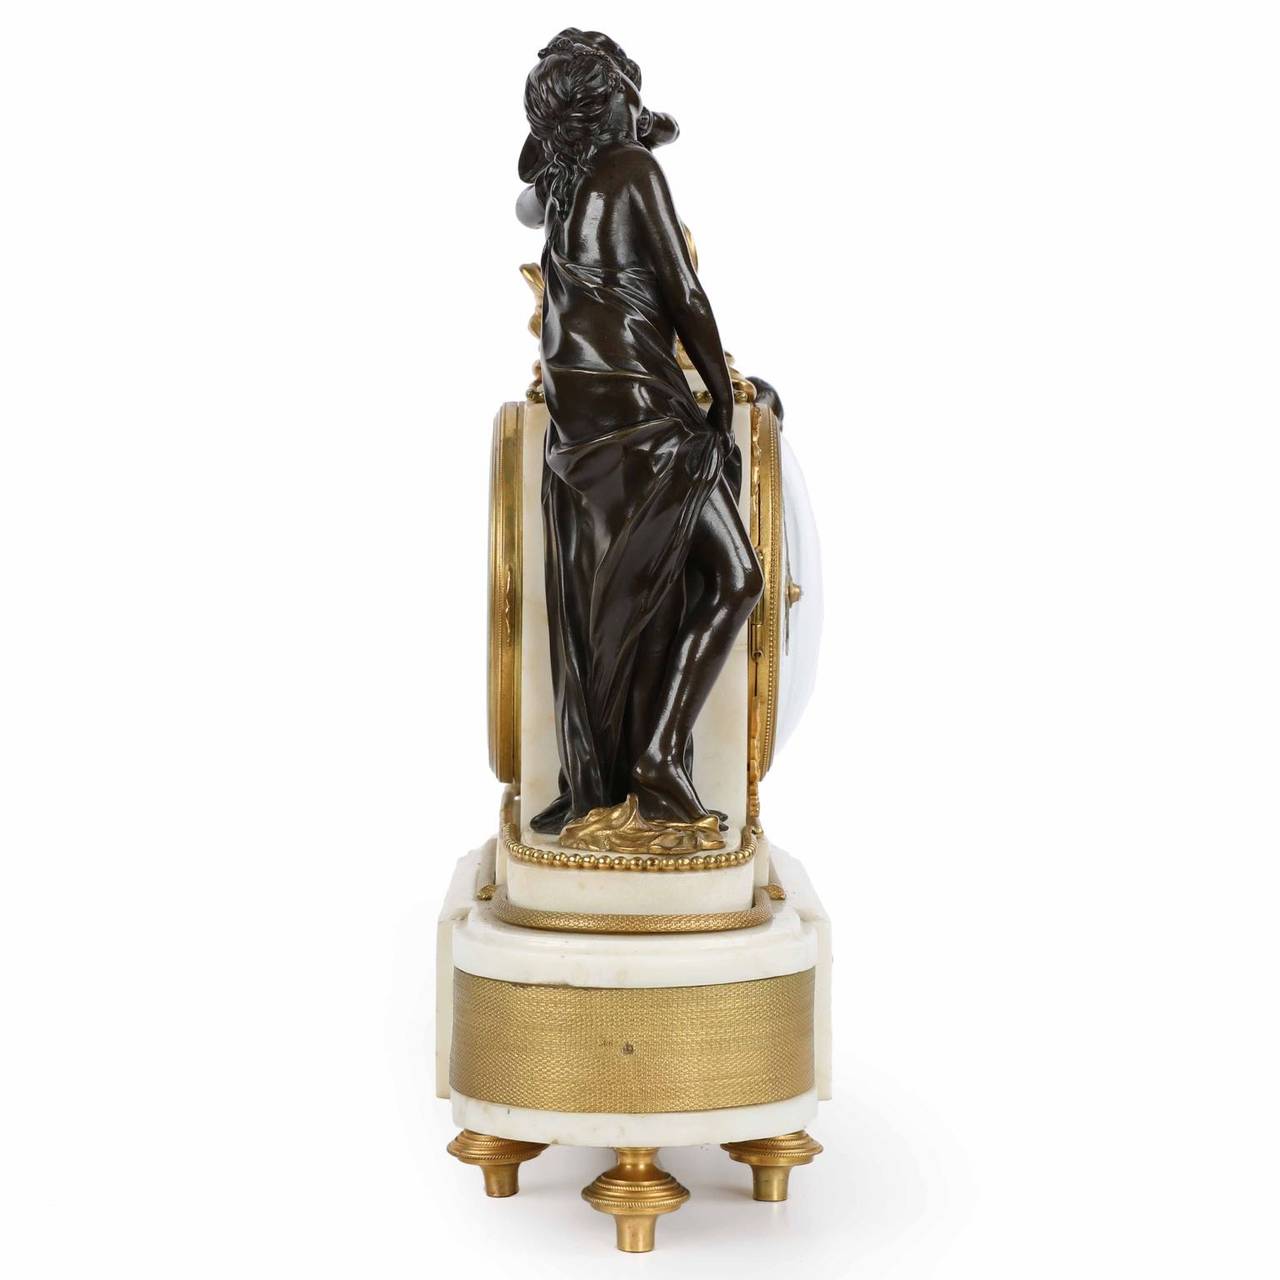 Gilt French Louis XVI Bronze and Marble Antique Figural Mantel Clock, 19th Century